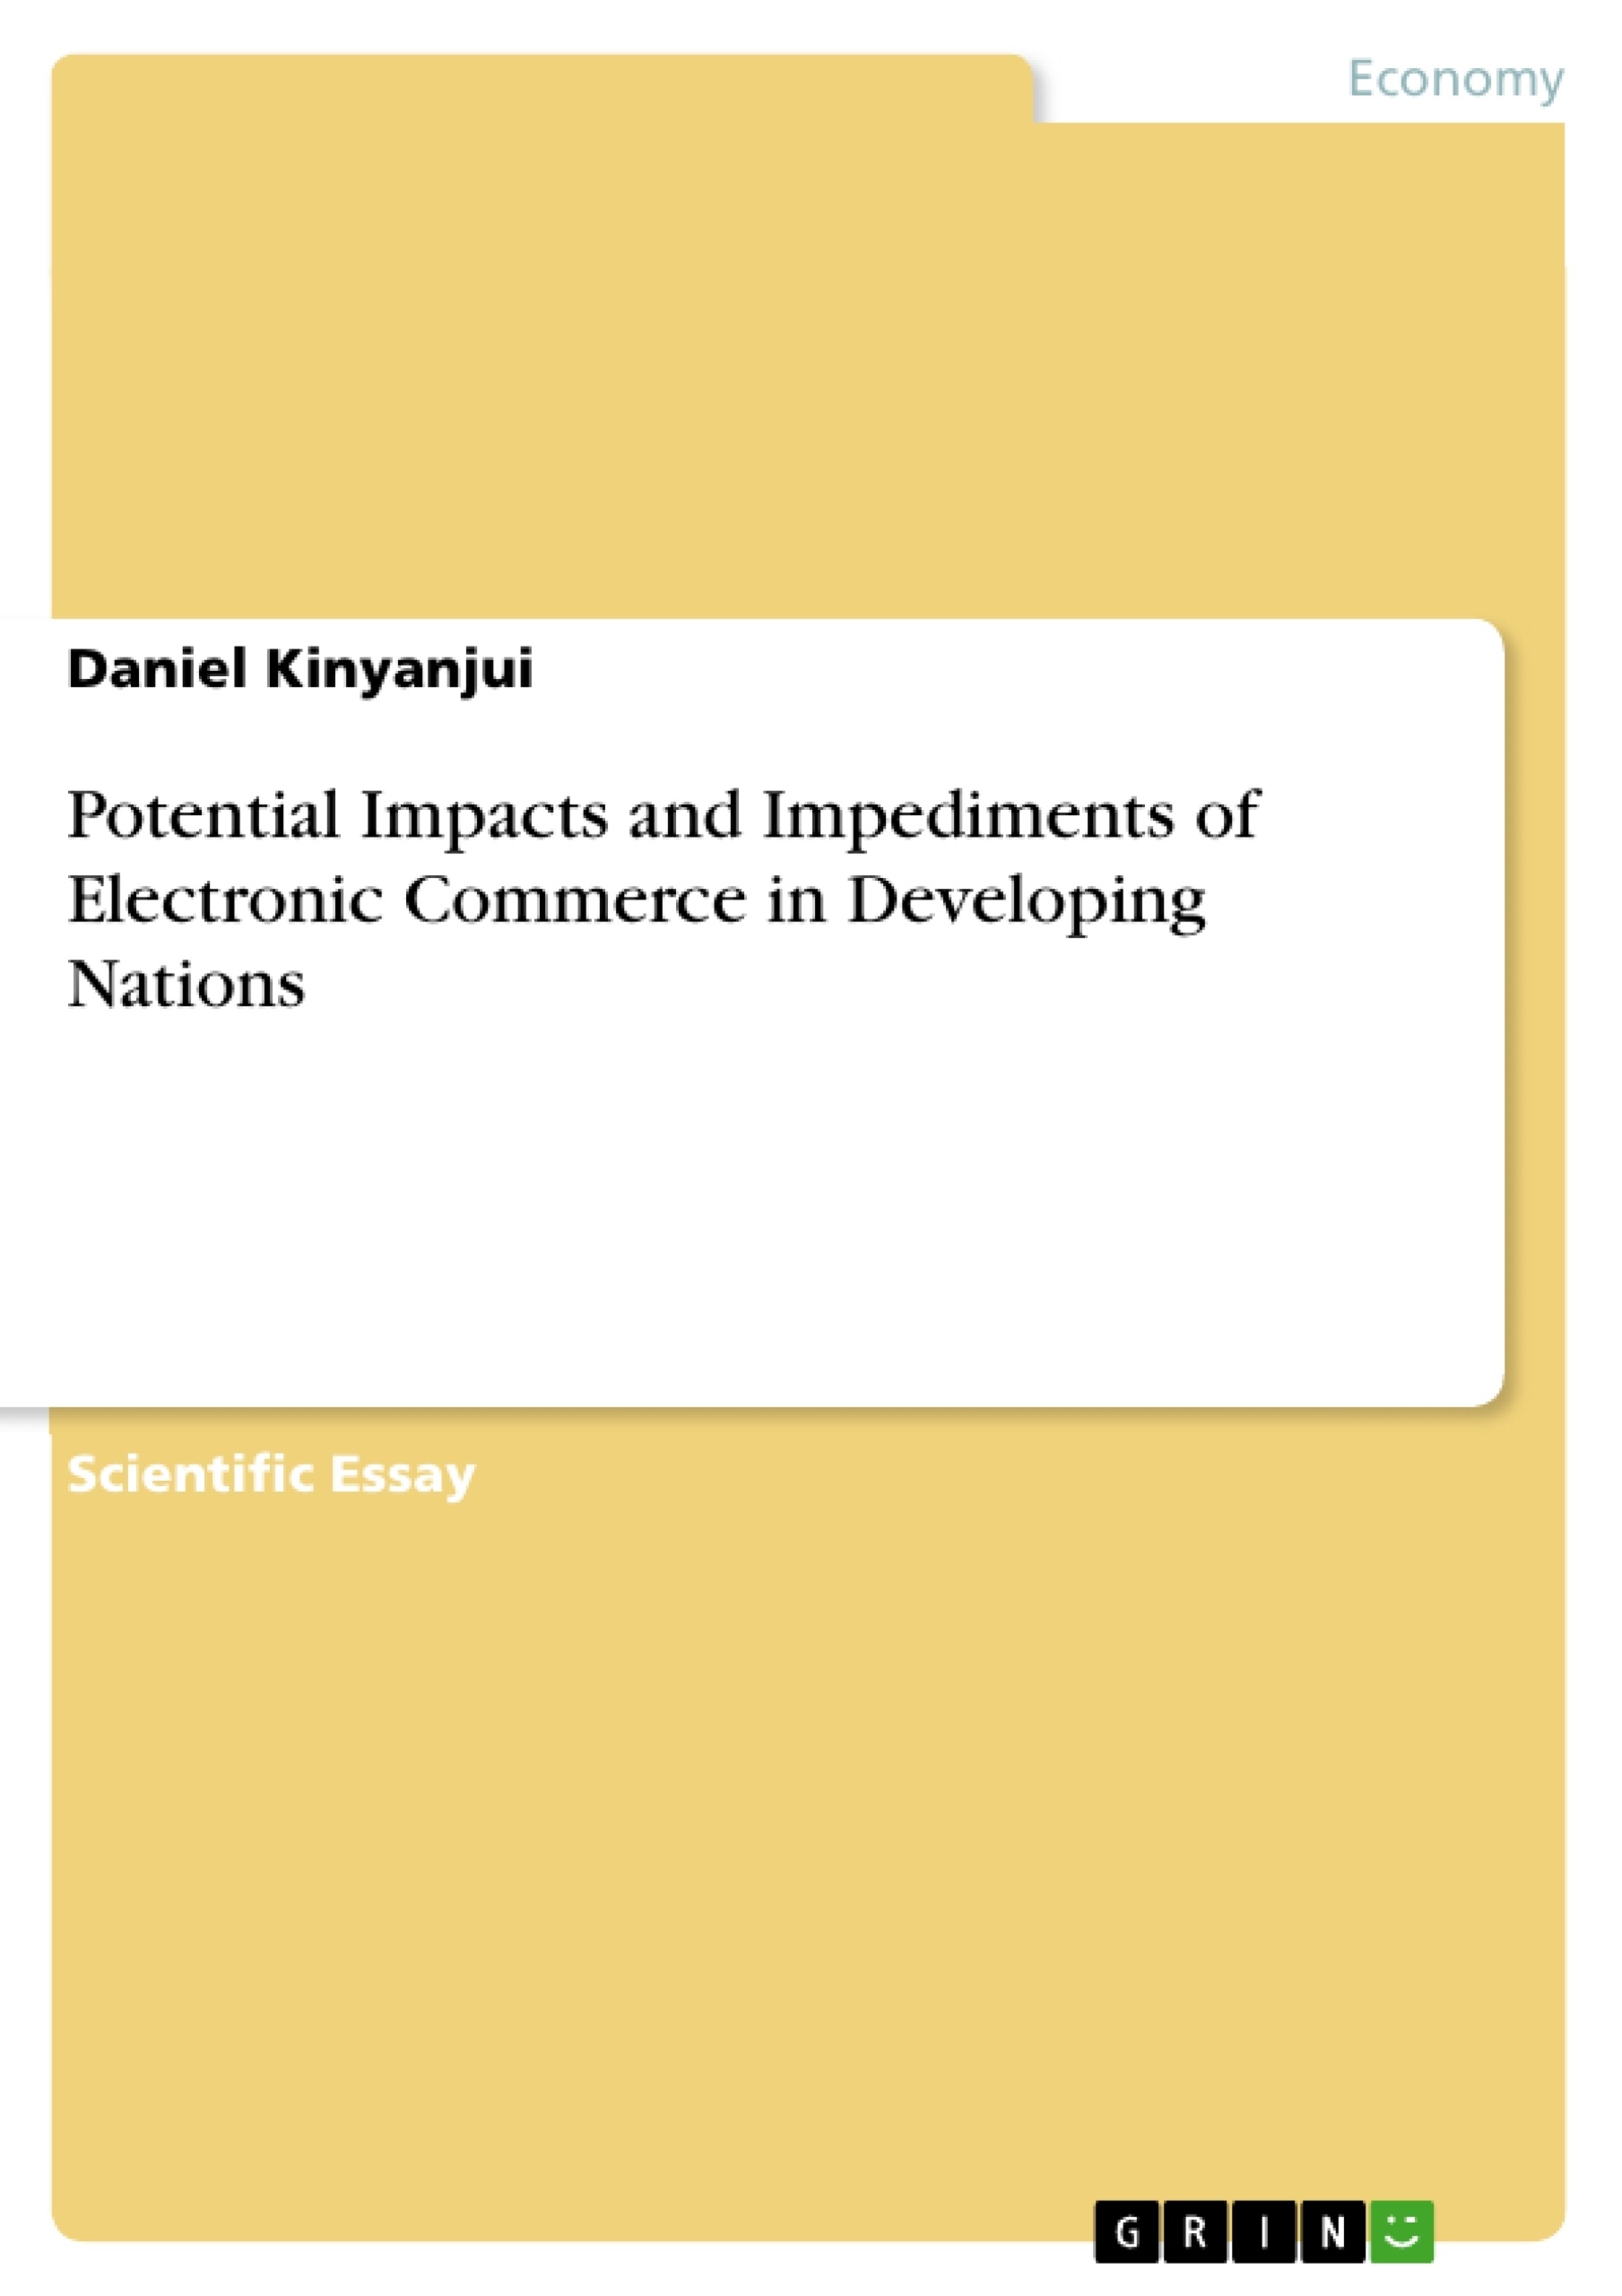 Titre: Potential Impacts and Impediments of Electronic Commerce in Developing Nations